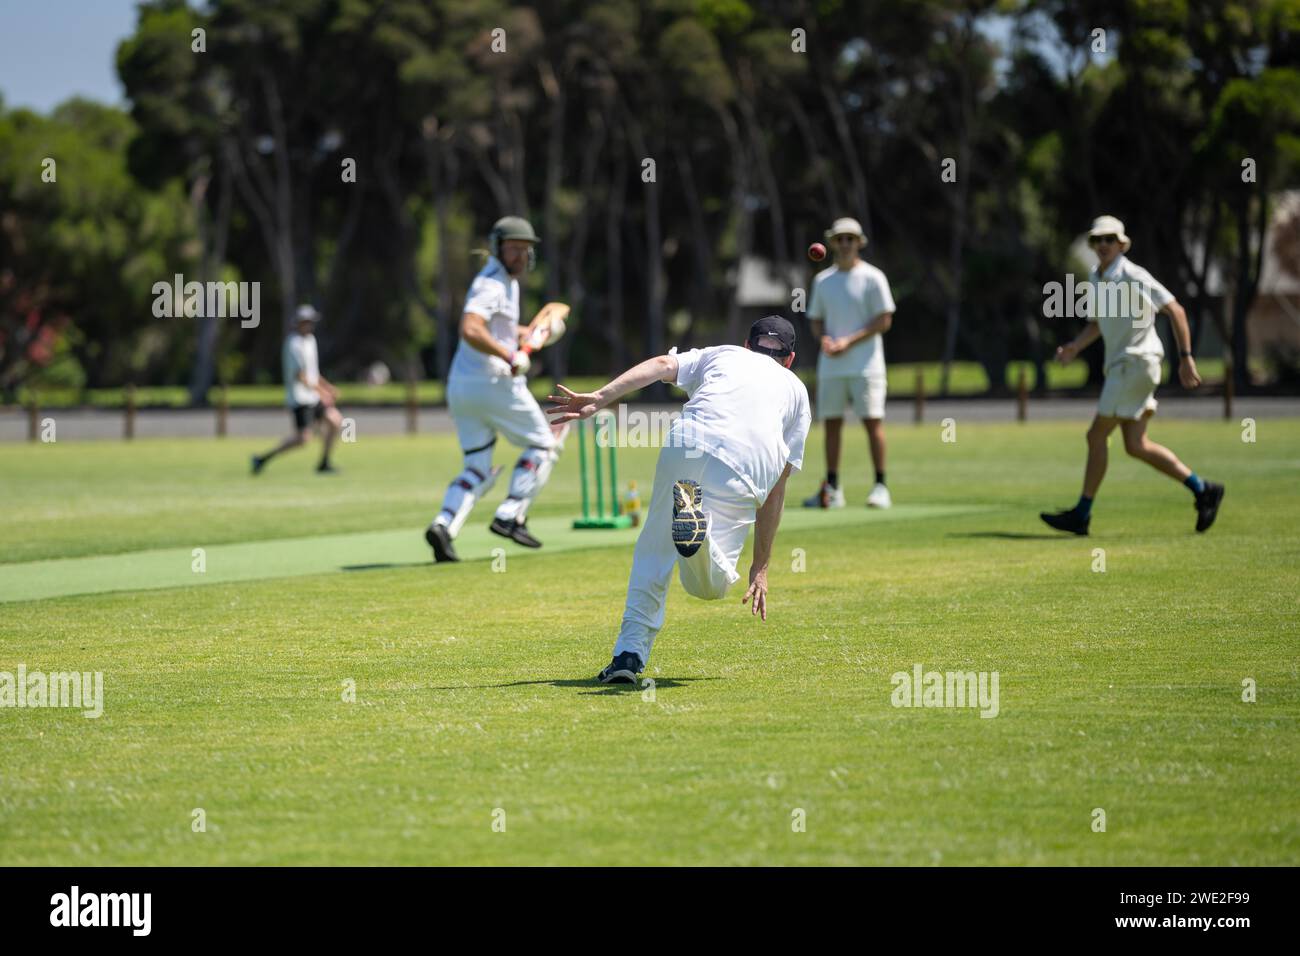 a local cricket match being played on a green cricket oval in summer in australia Stock Photo